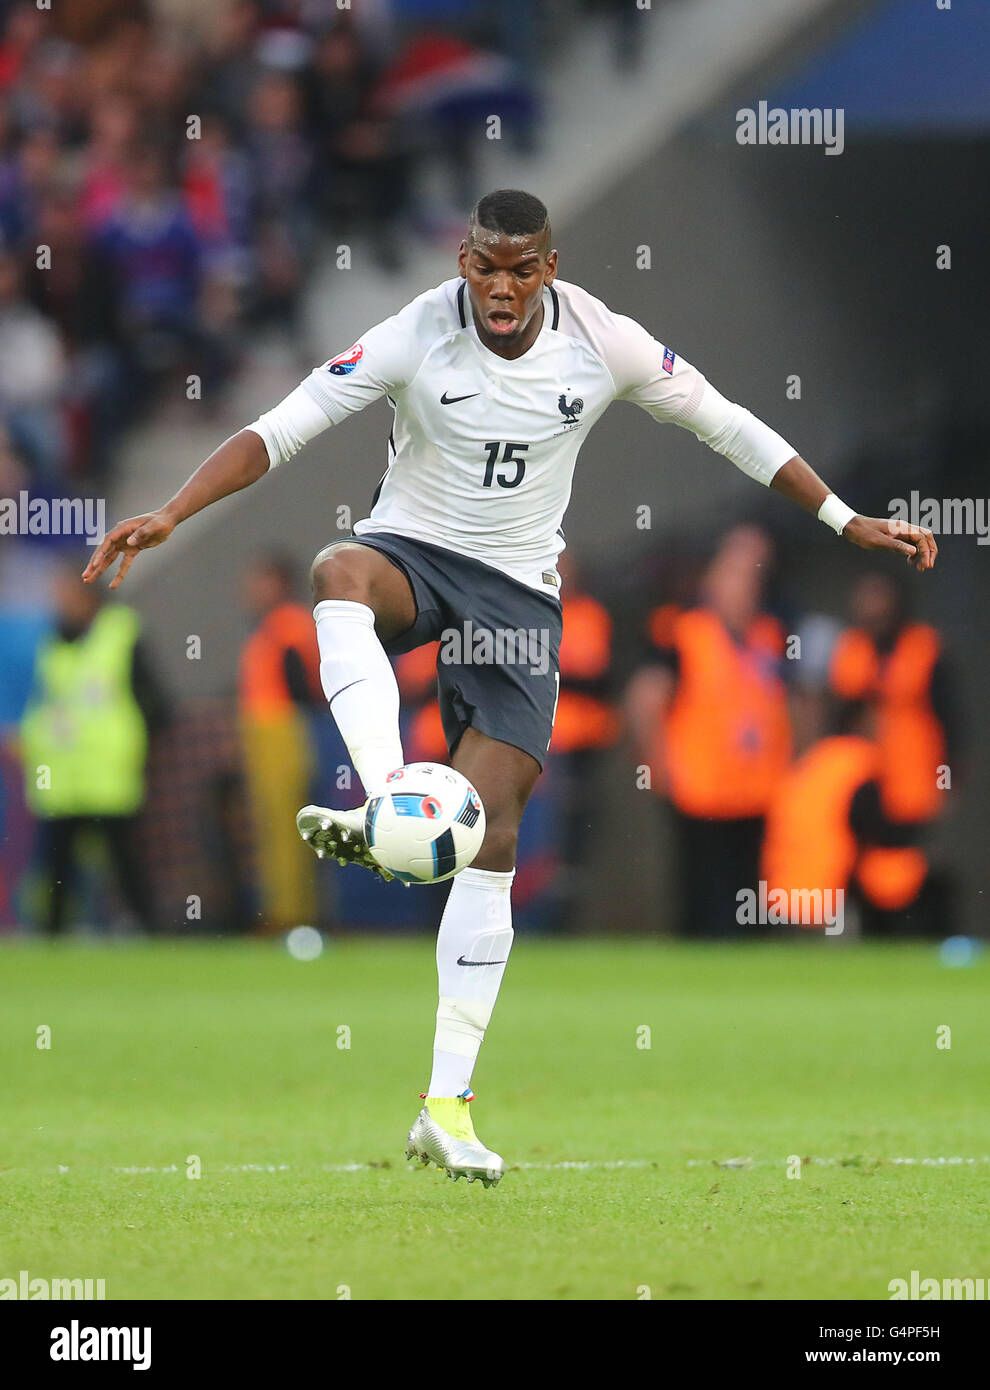 Lille, France. 19th June, 2016. Paul POGBA, FRA 15 drives the ball, action,  full-size, FRANCE - SWITZERLAND Group A ,Football European Championships  EURO at June 19, 2016 in Lille, France. Fussball, Nationalteam,